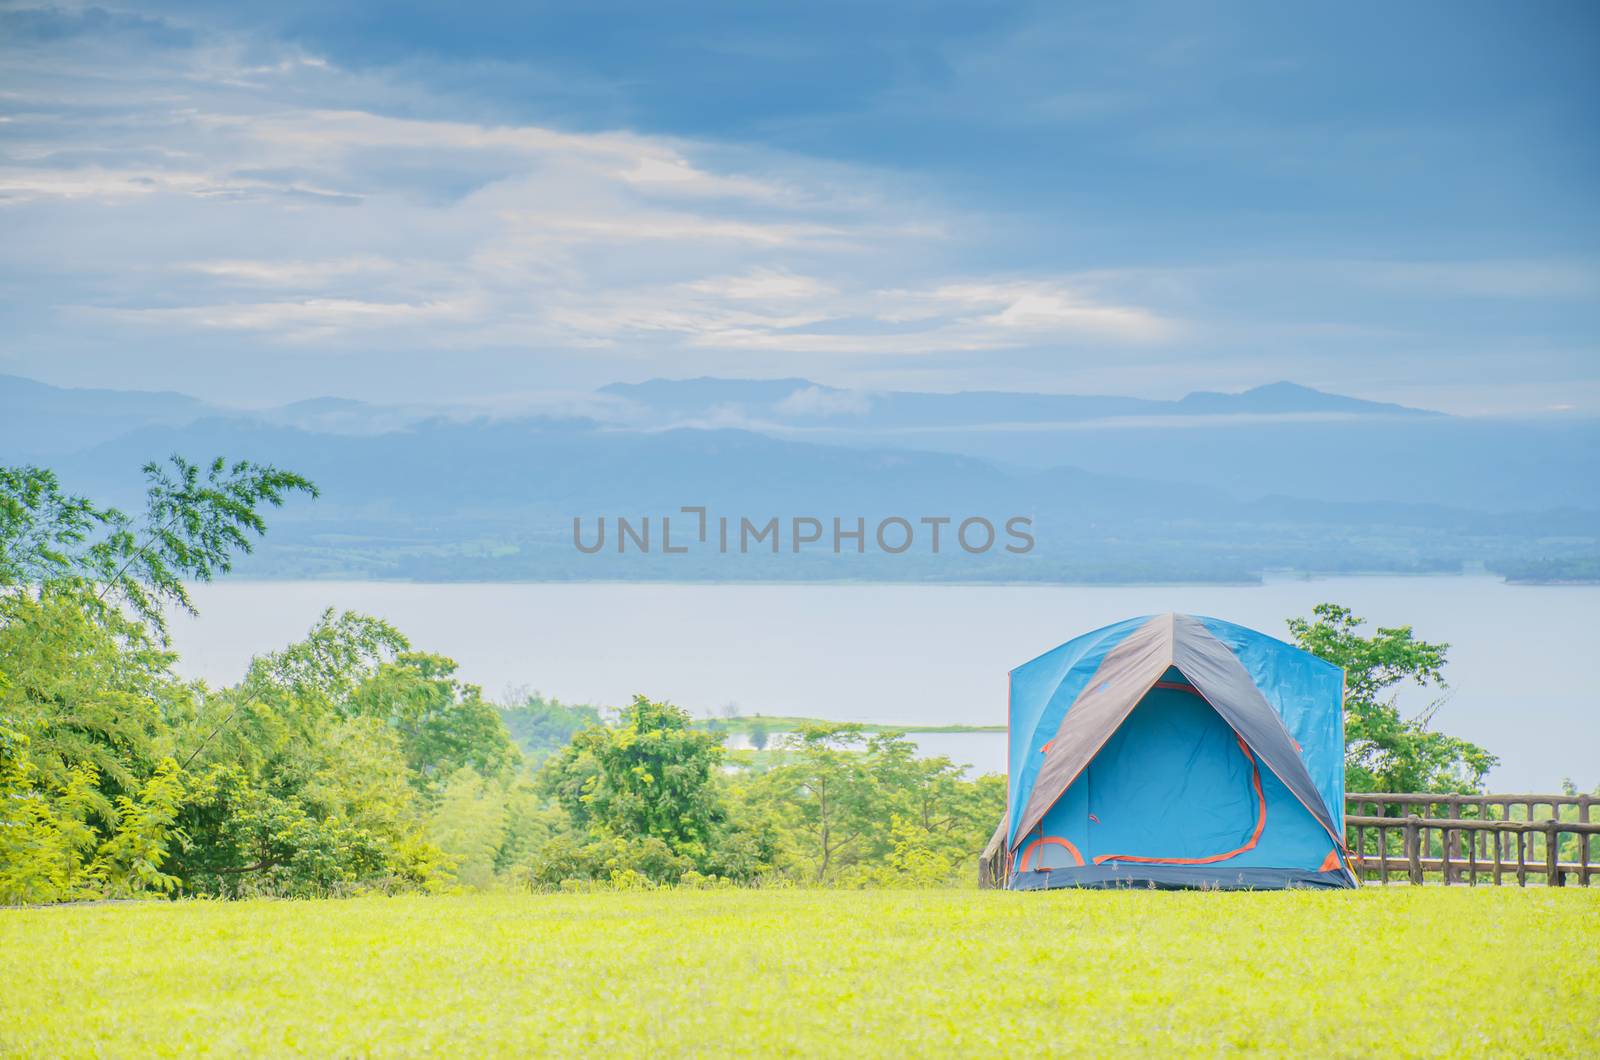 Camping trip tent on holiday. Adventures Camping tourism and tent.  Beautiful lake with tent in place for camping at Srinakarin Dam viewpoint in Huai Mae Khamin Waterfall ,Thailand.